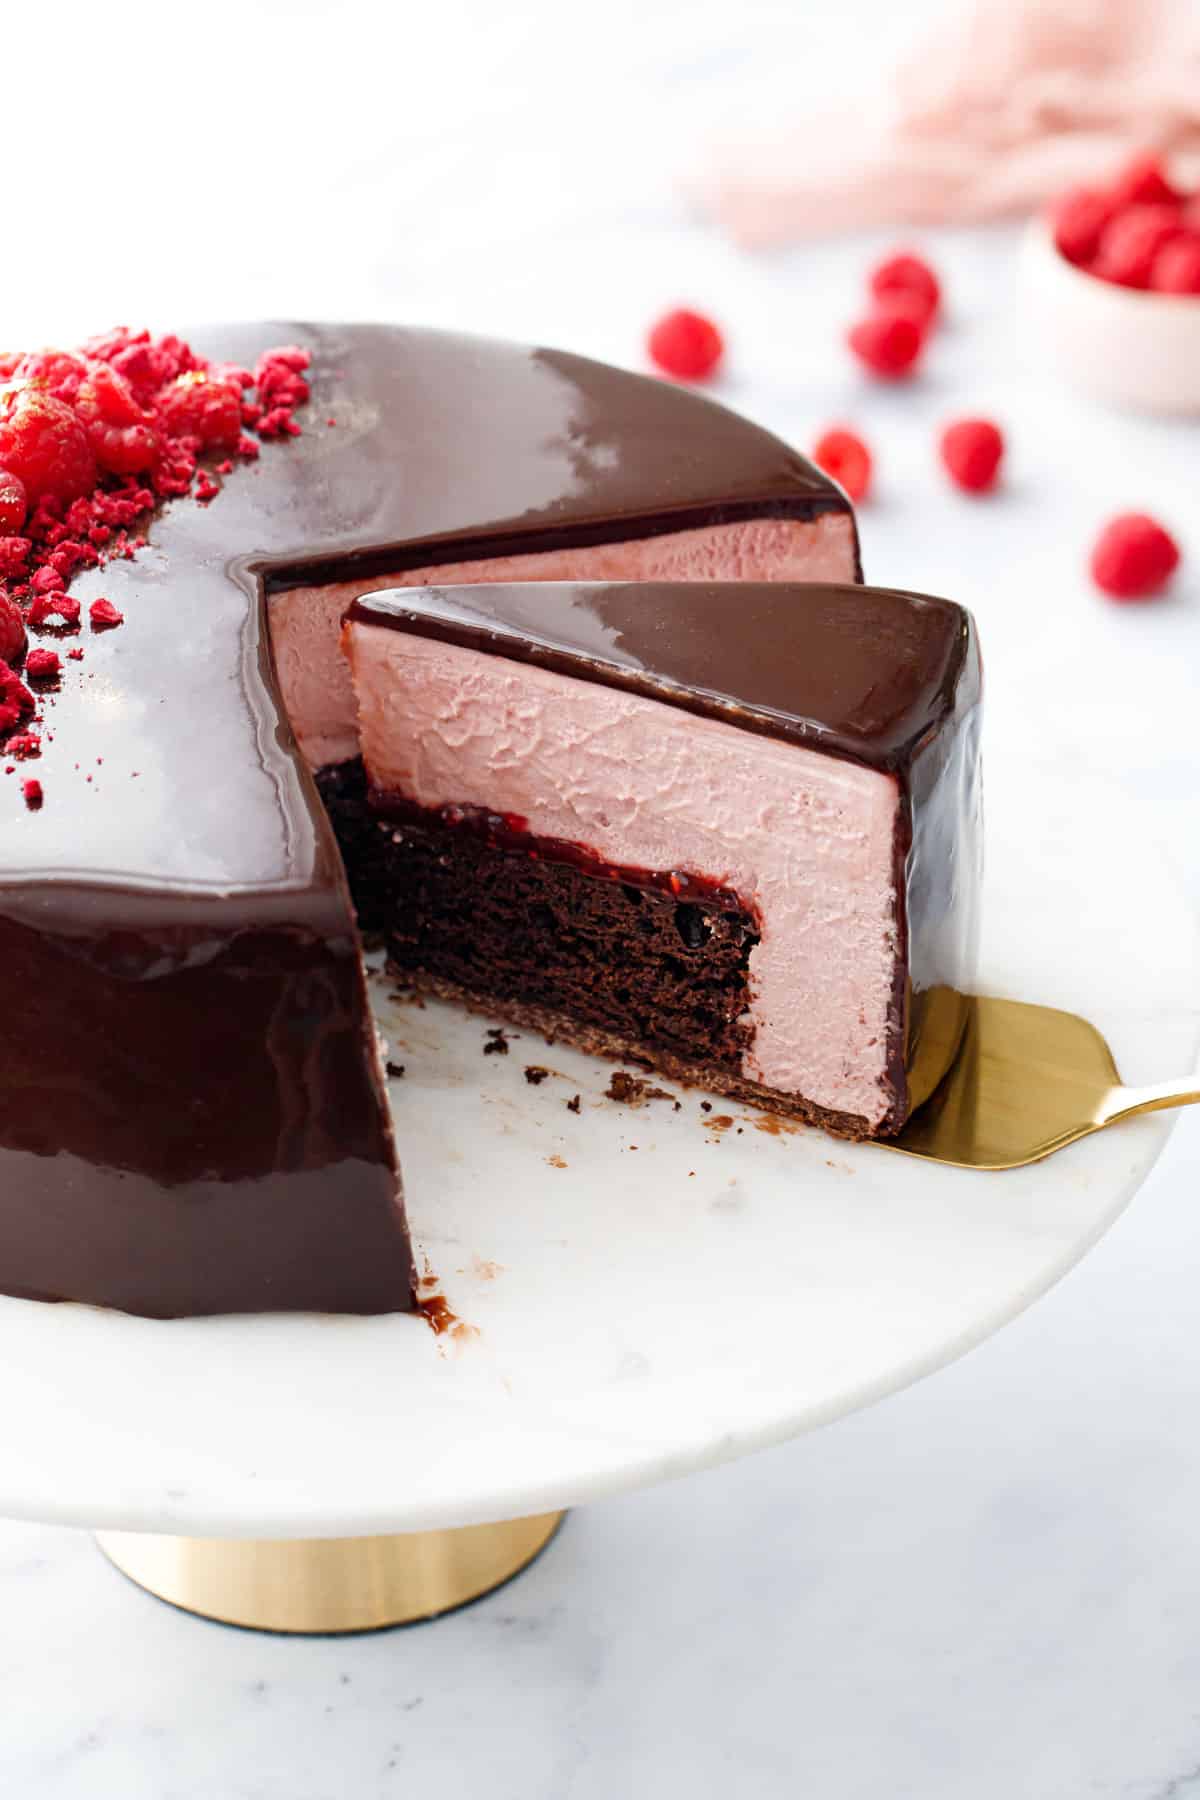 Slice of Chocolate Raspberry Mousse Cake showing the layers of chocolate cake, raspberry jam, and pale pink raspberry mousse inside.